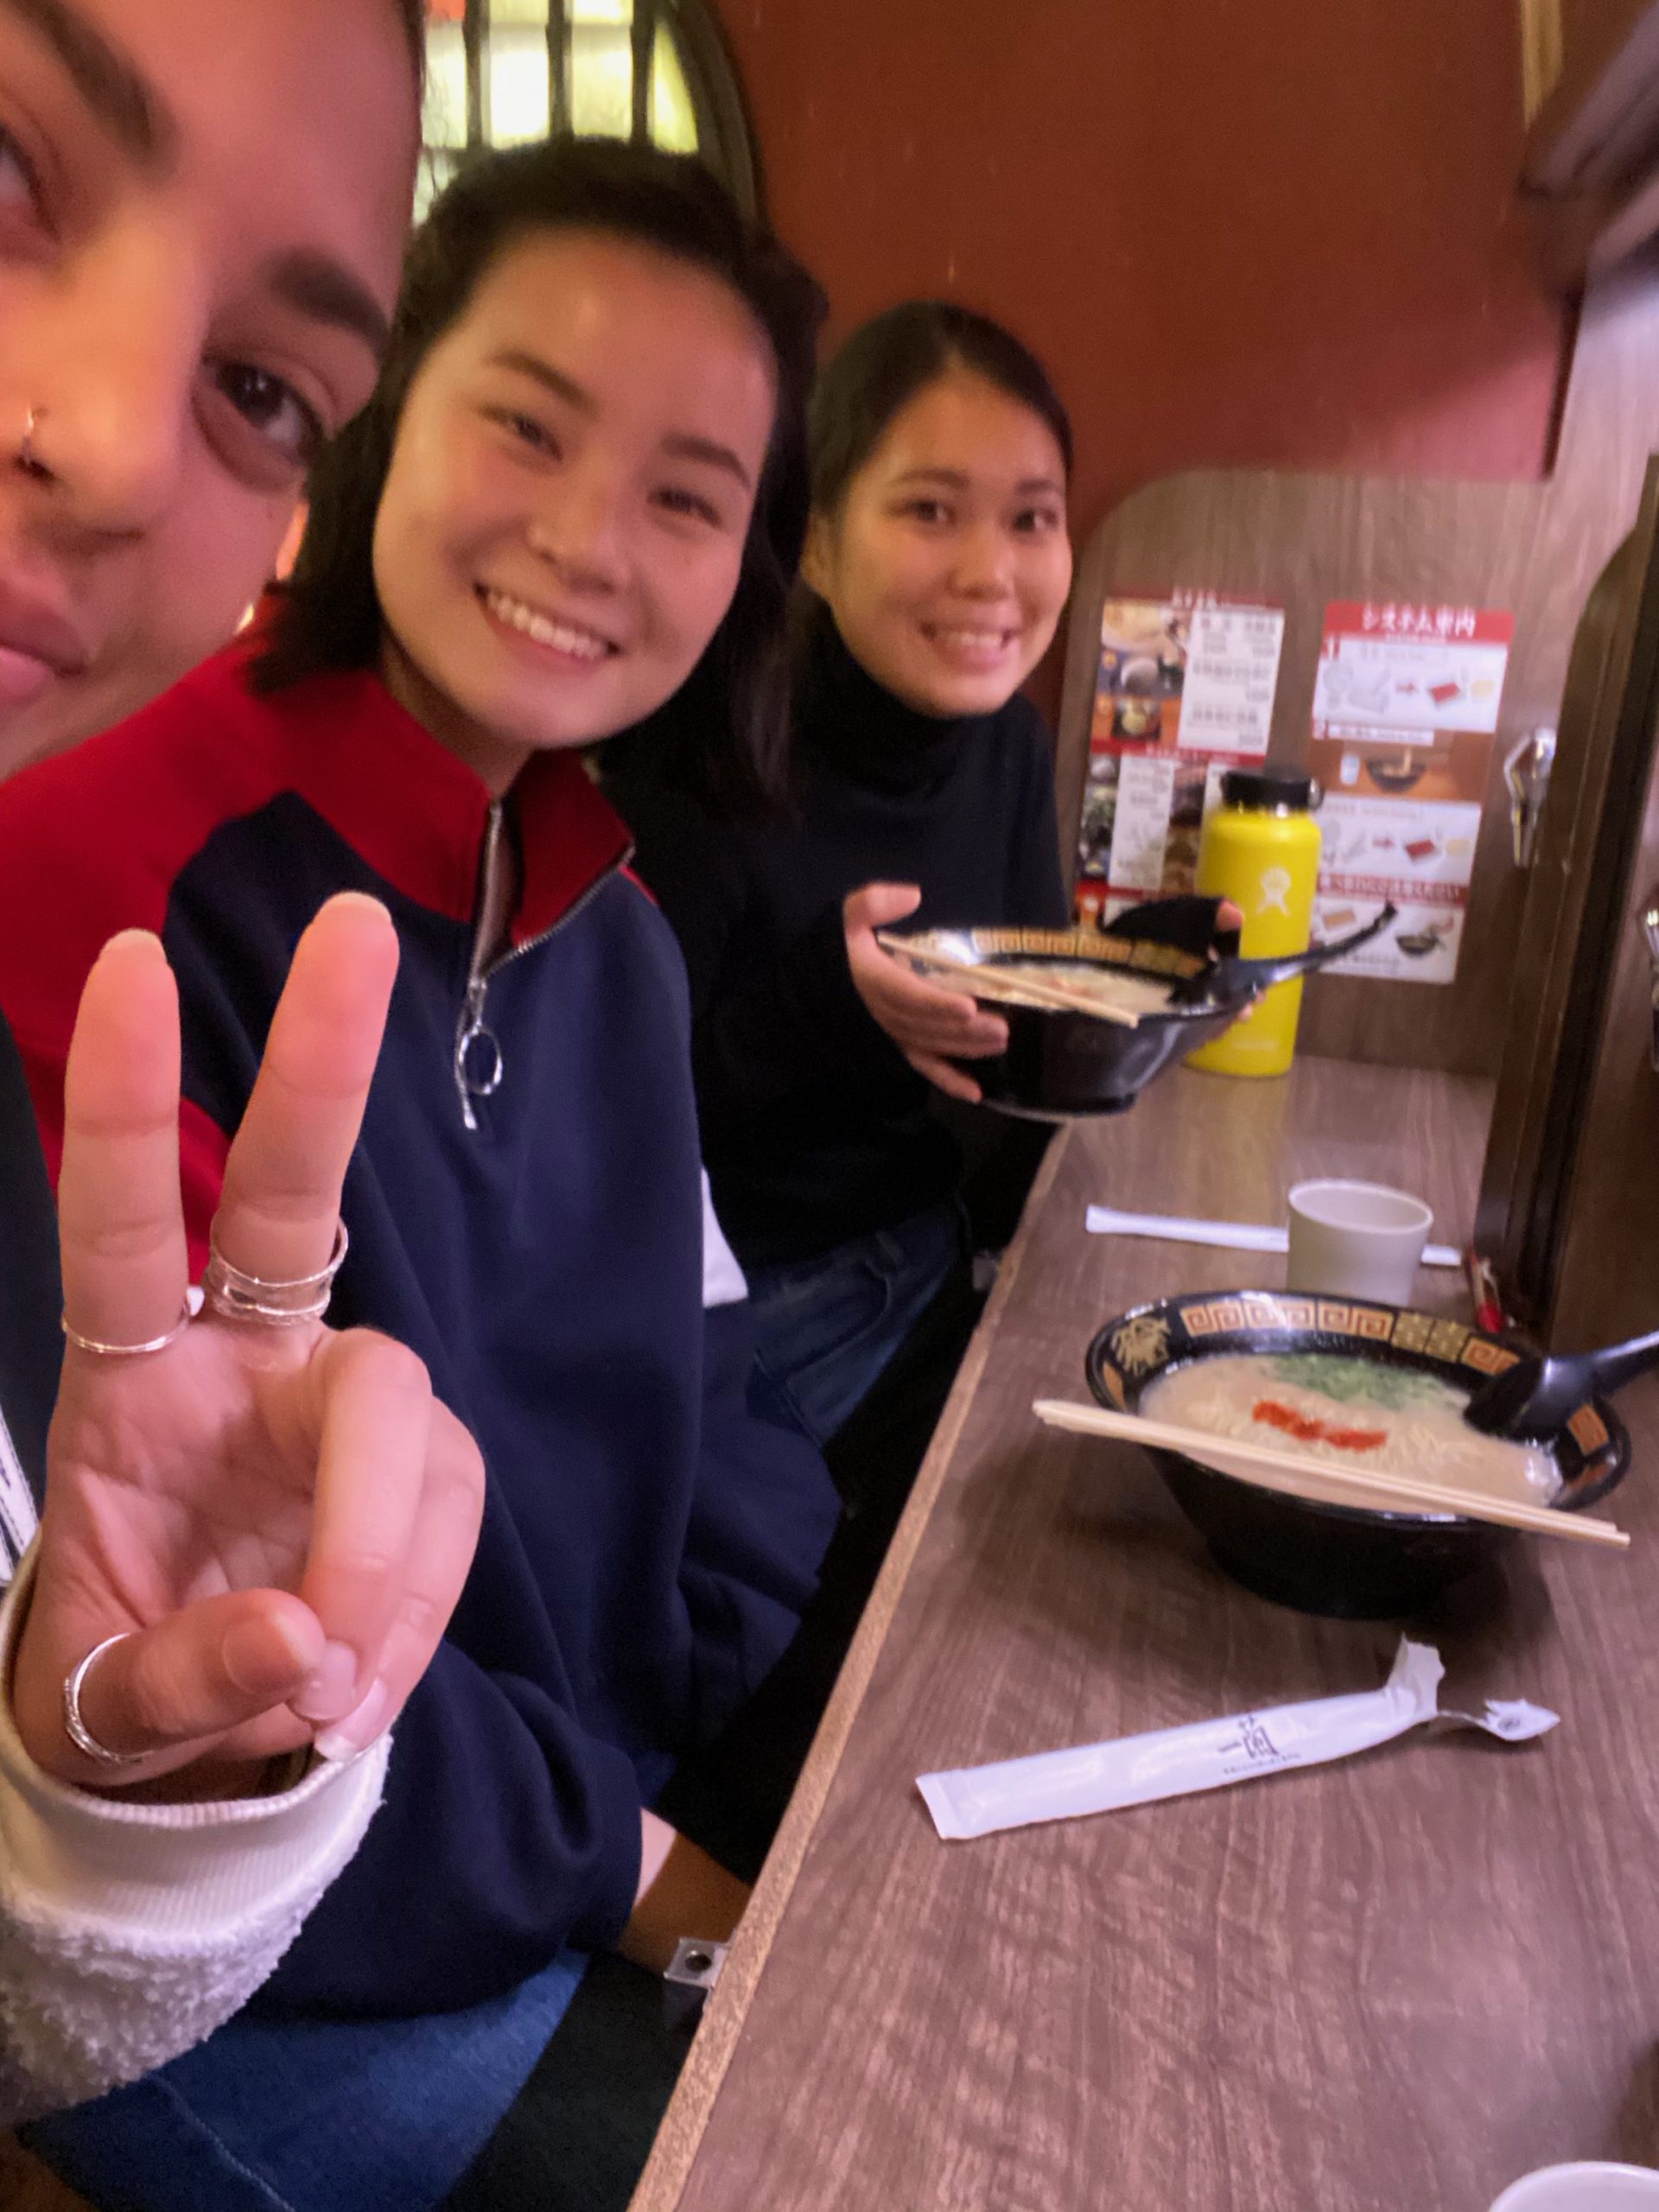 Me, Isis, and Emi at an Ichiran counter with bowls of ramen in front of us.